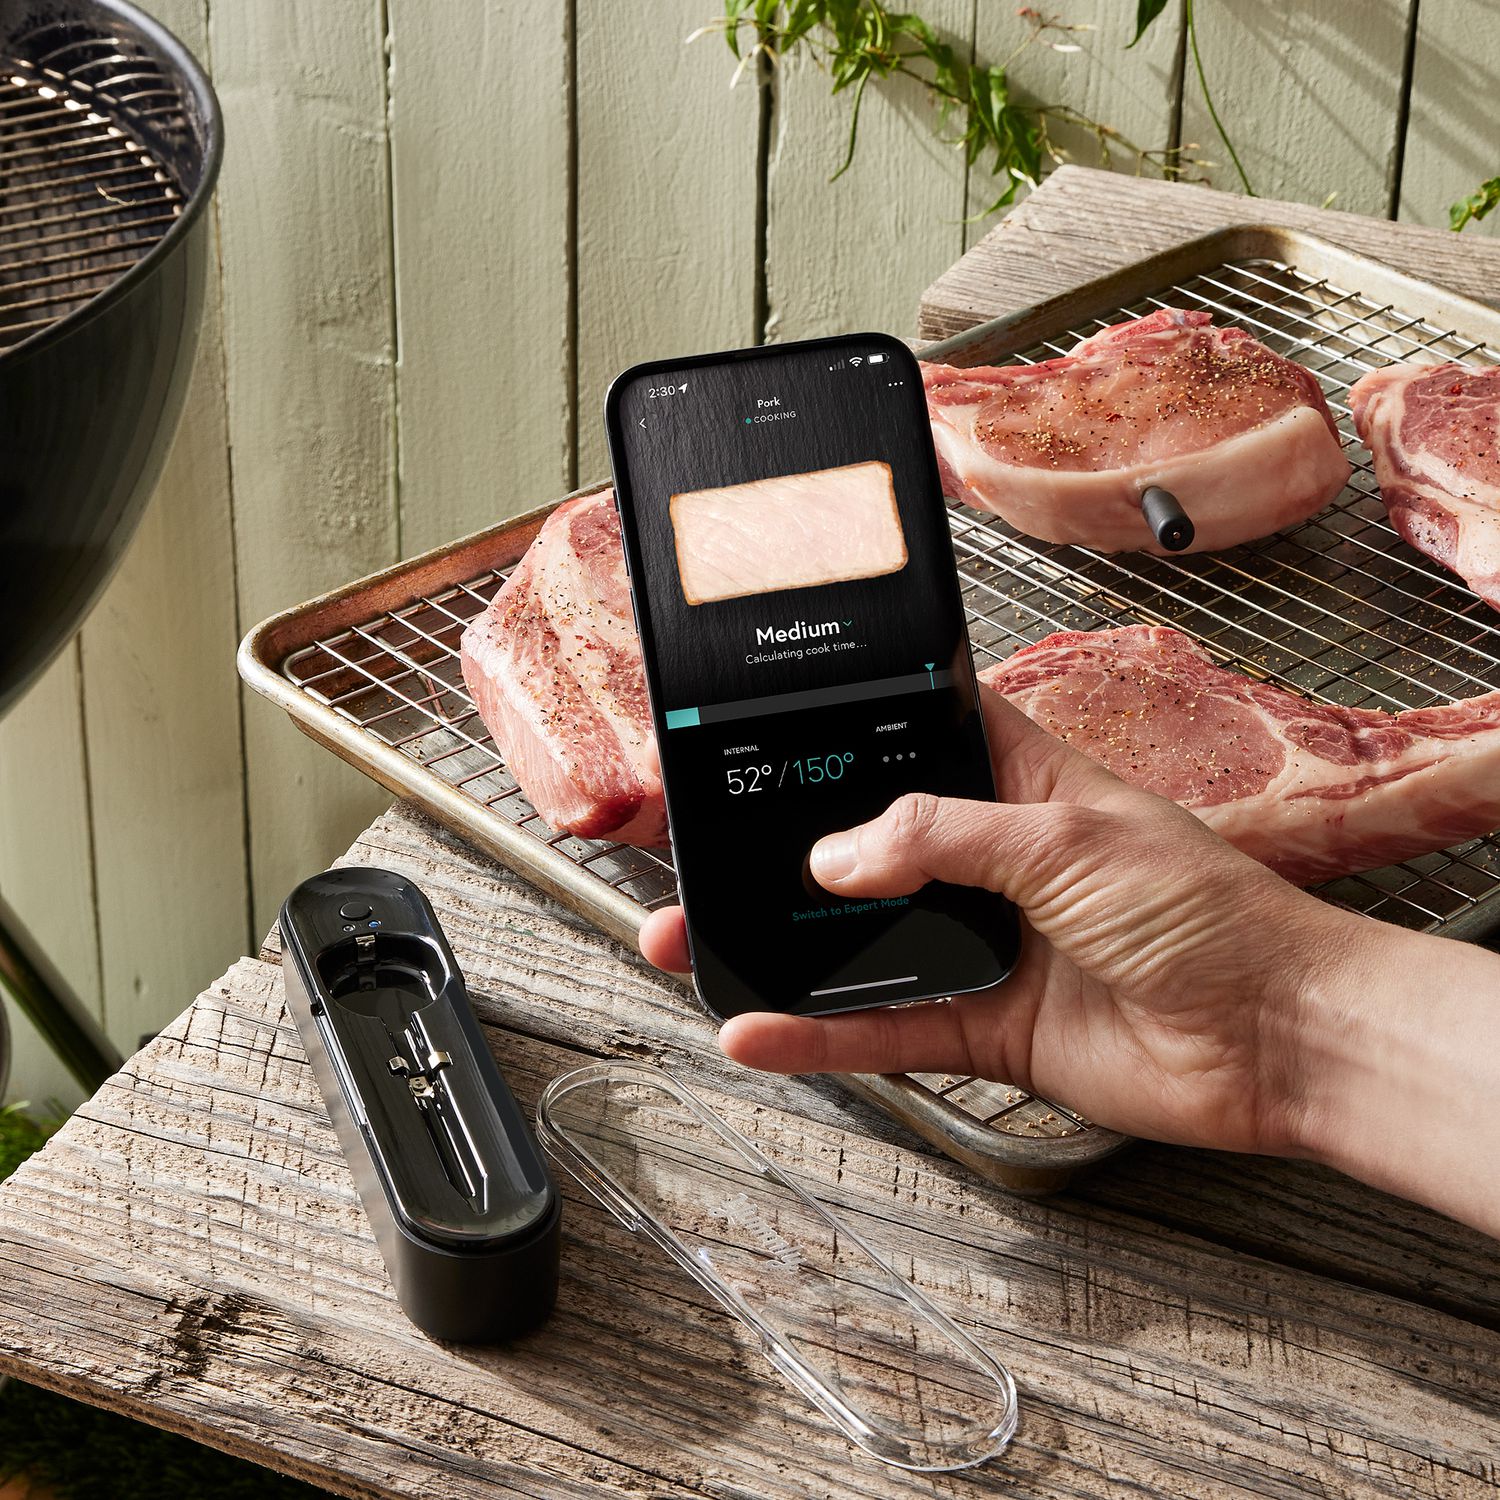 How To Know When Your Meat is Cooked - Yummly Smart Thermometer Review -  HighTechDad™